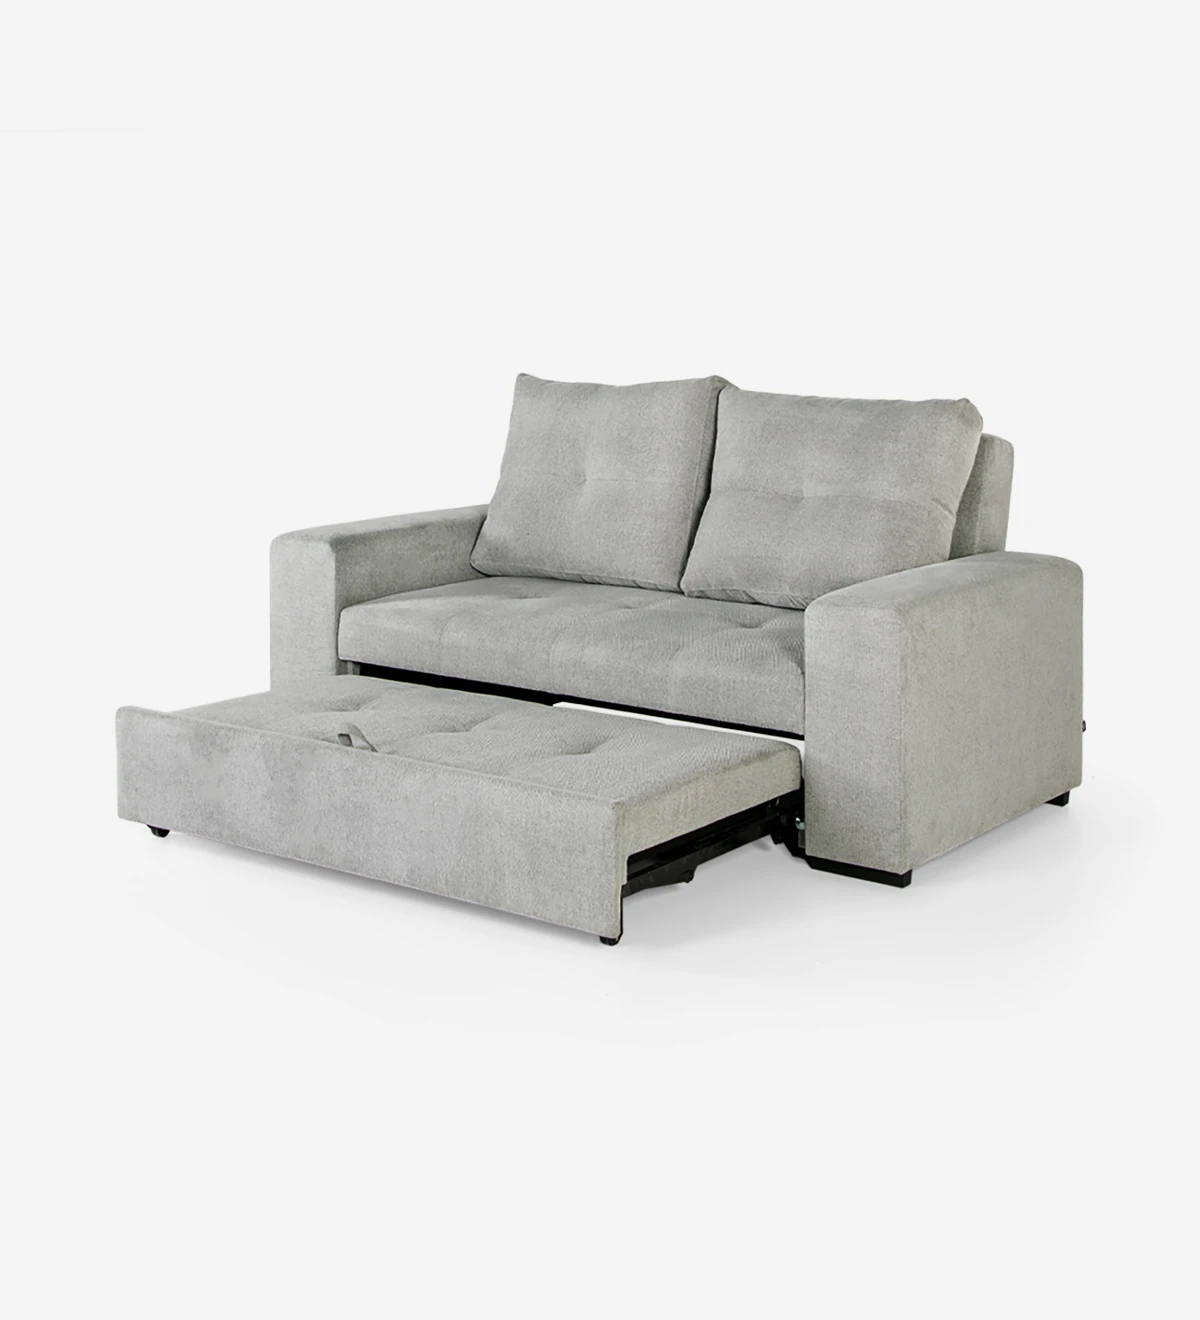 2 seater with bed, fabric upholstered, with removable backrest cushions.